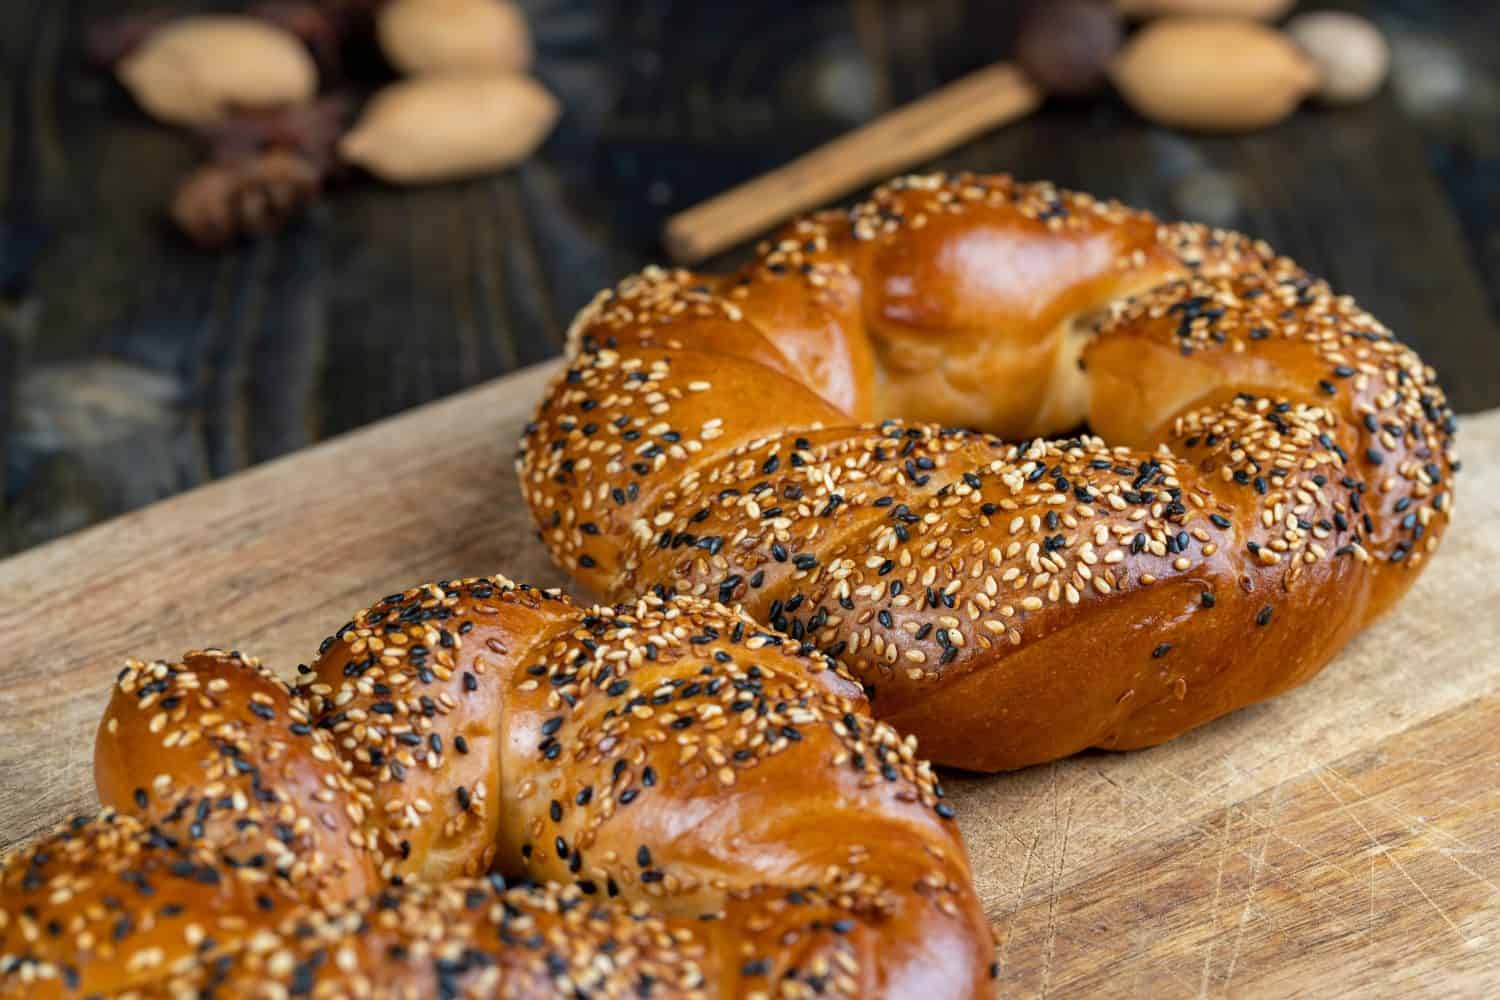 soft and fresh wheat bagel sprinkled with white and black sesame seeds, cooked wheat flour bagels and covered with sesame seeds